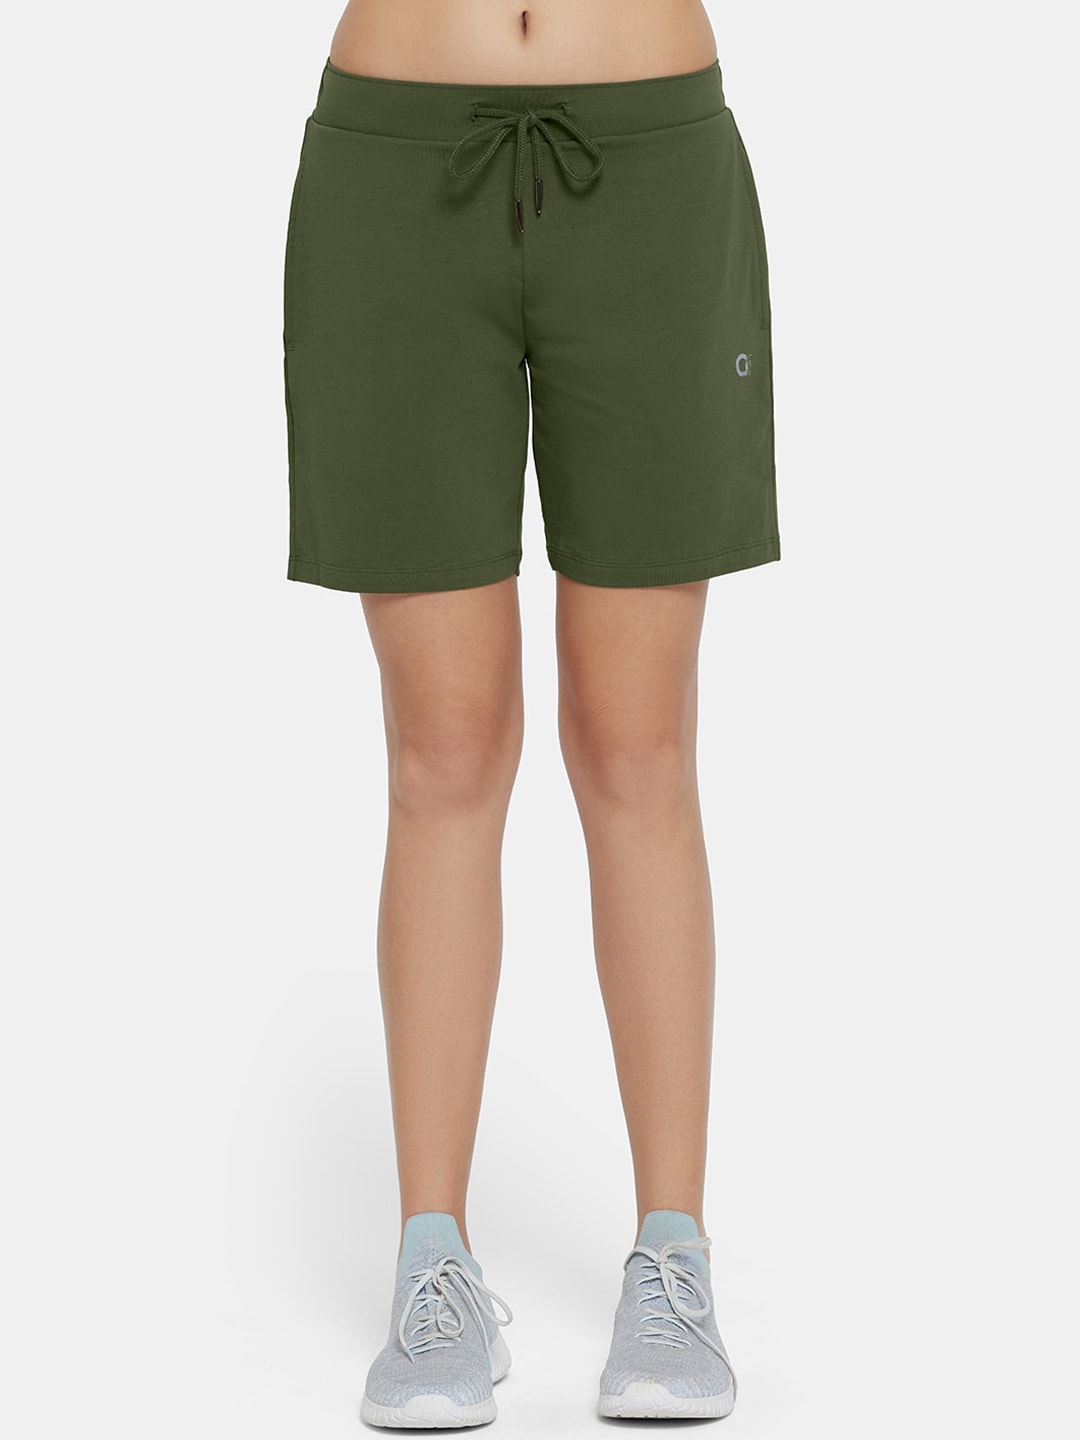 Amante Women Green Low-Rise Running Sports Shorts Price in India